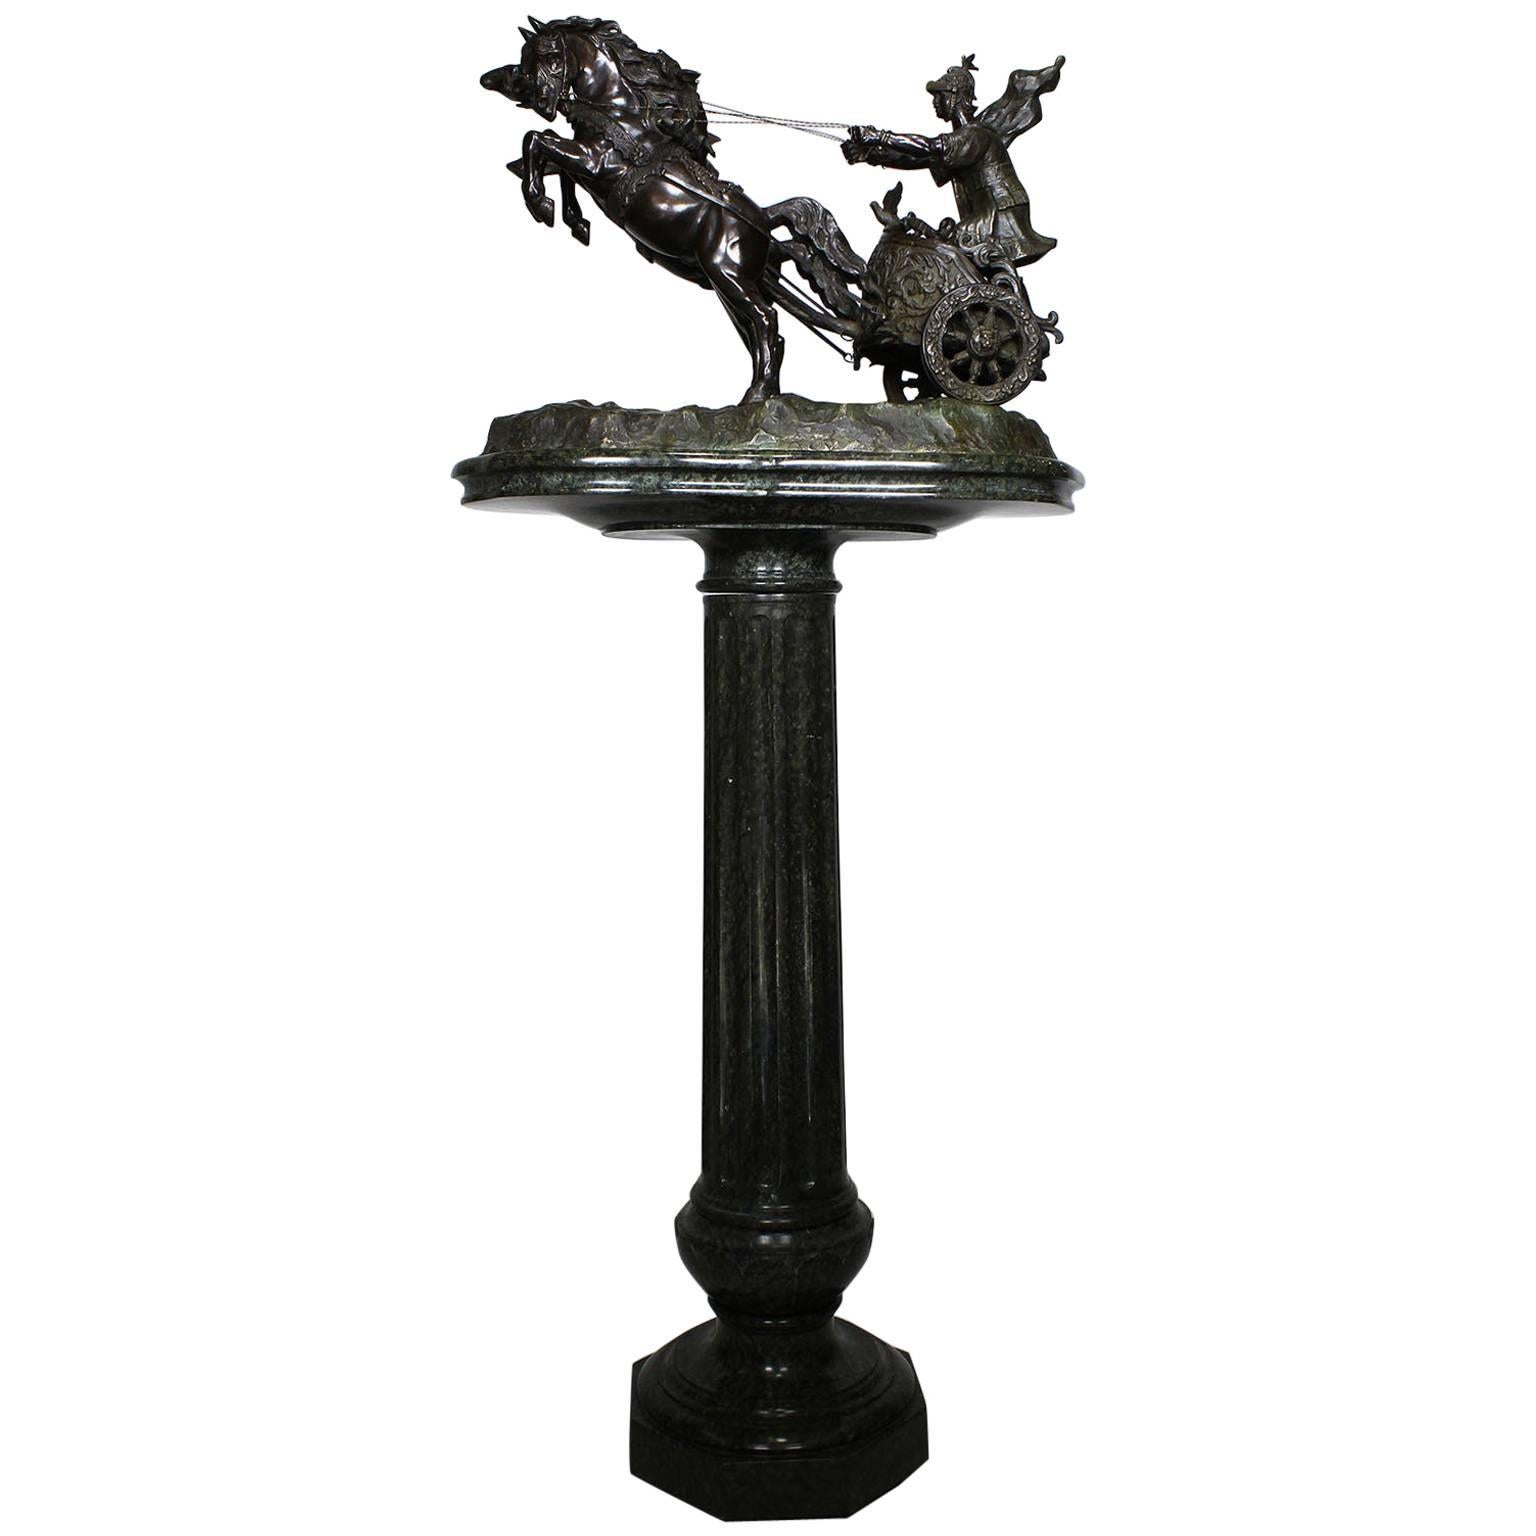 Italian 19th Century Bronze Sculpture Group of a Two-Horse Roman Chariot & Rider For Sale